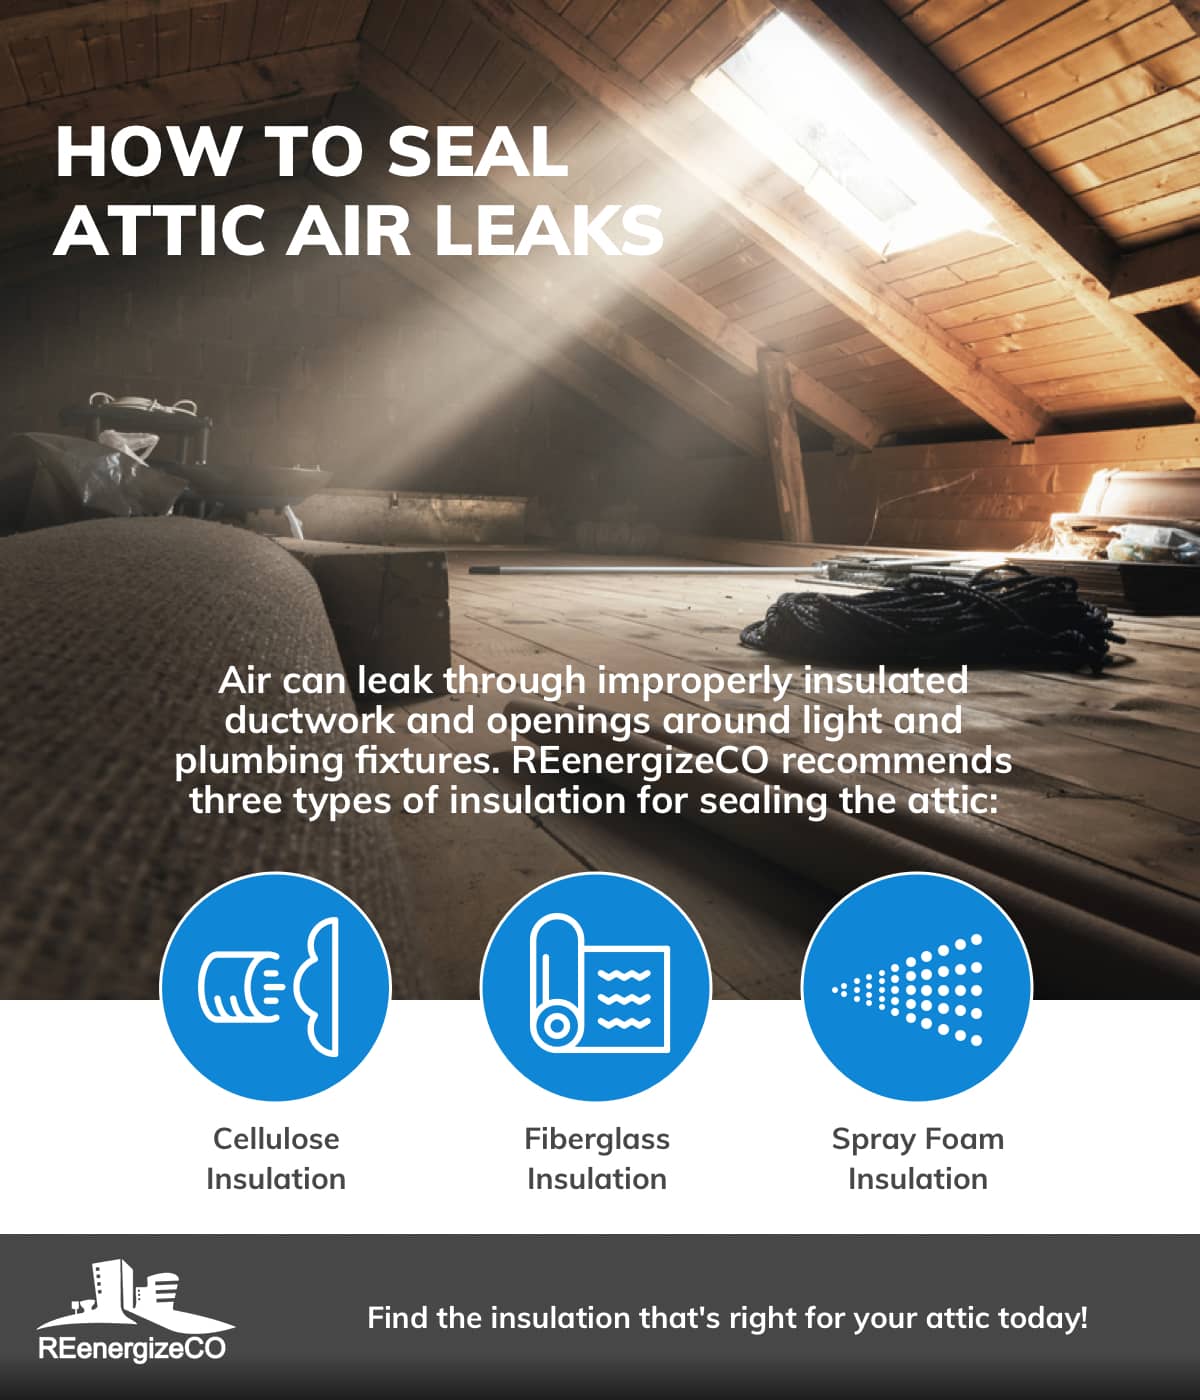 Insulation Options for Sealing Attic Air Leaks | REenergizeCO